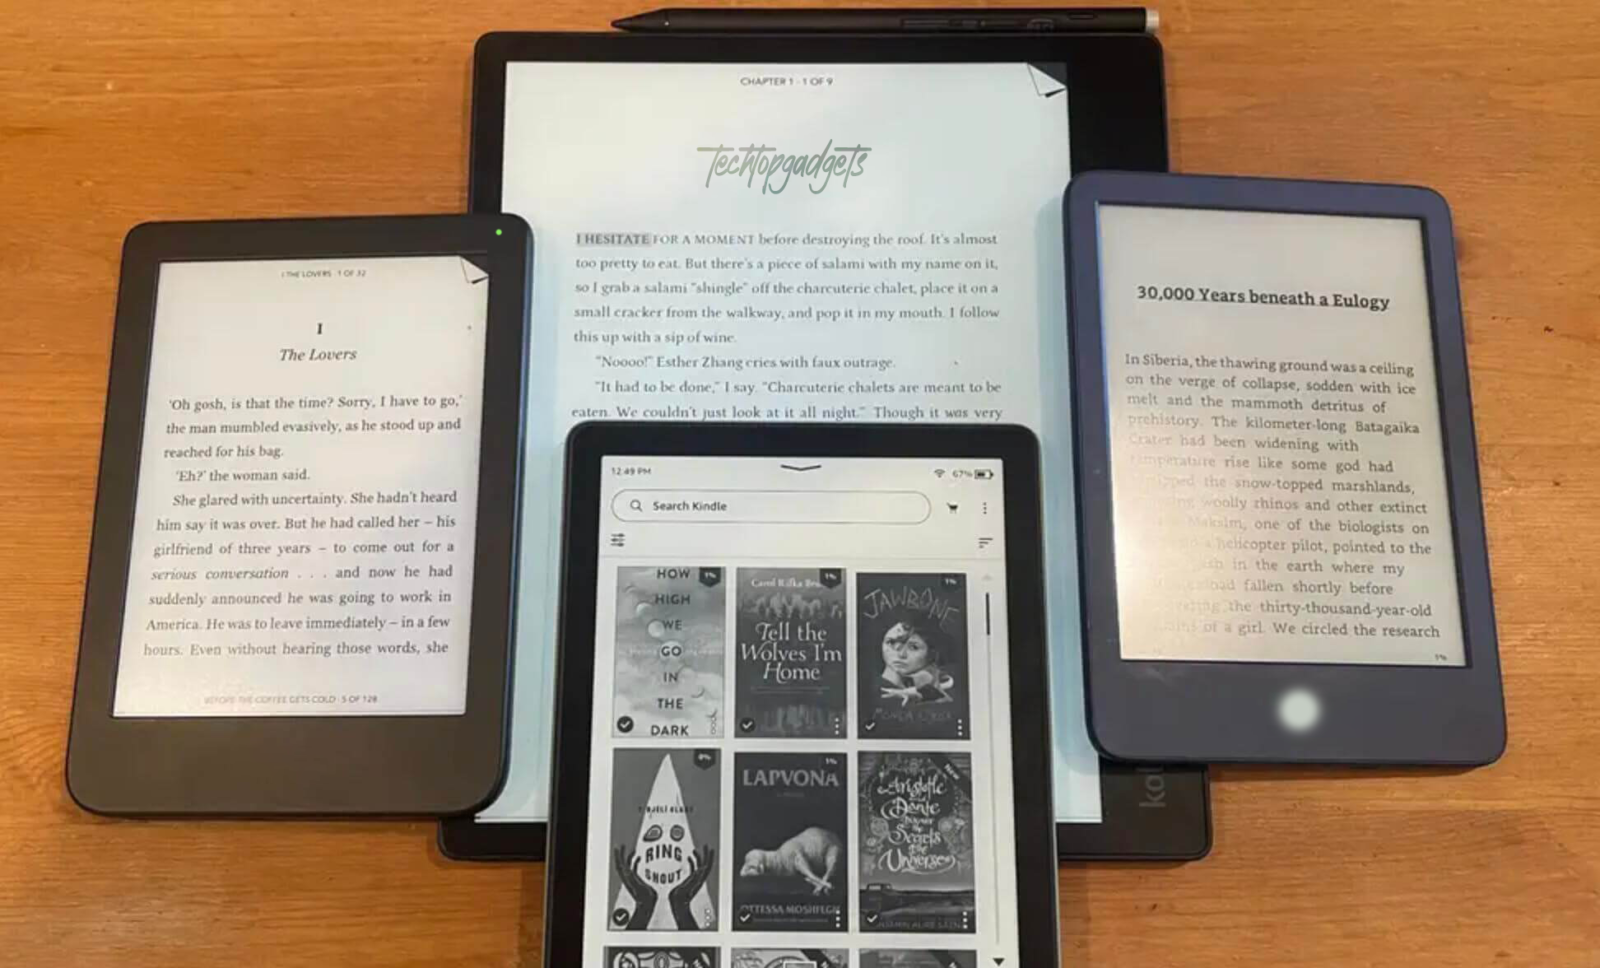 This image captures a collection of the best e-readers for PDF books, showcasing their diverse screen sizes and interfaces, each providing a unique reading experience tailored to book lovers' preferences.